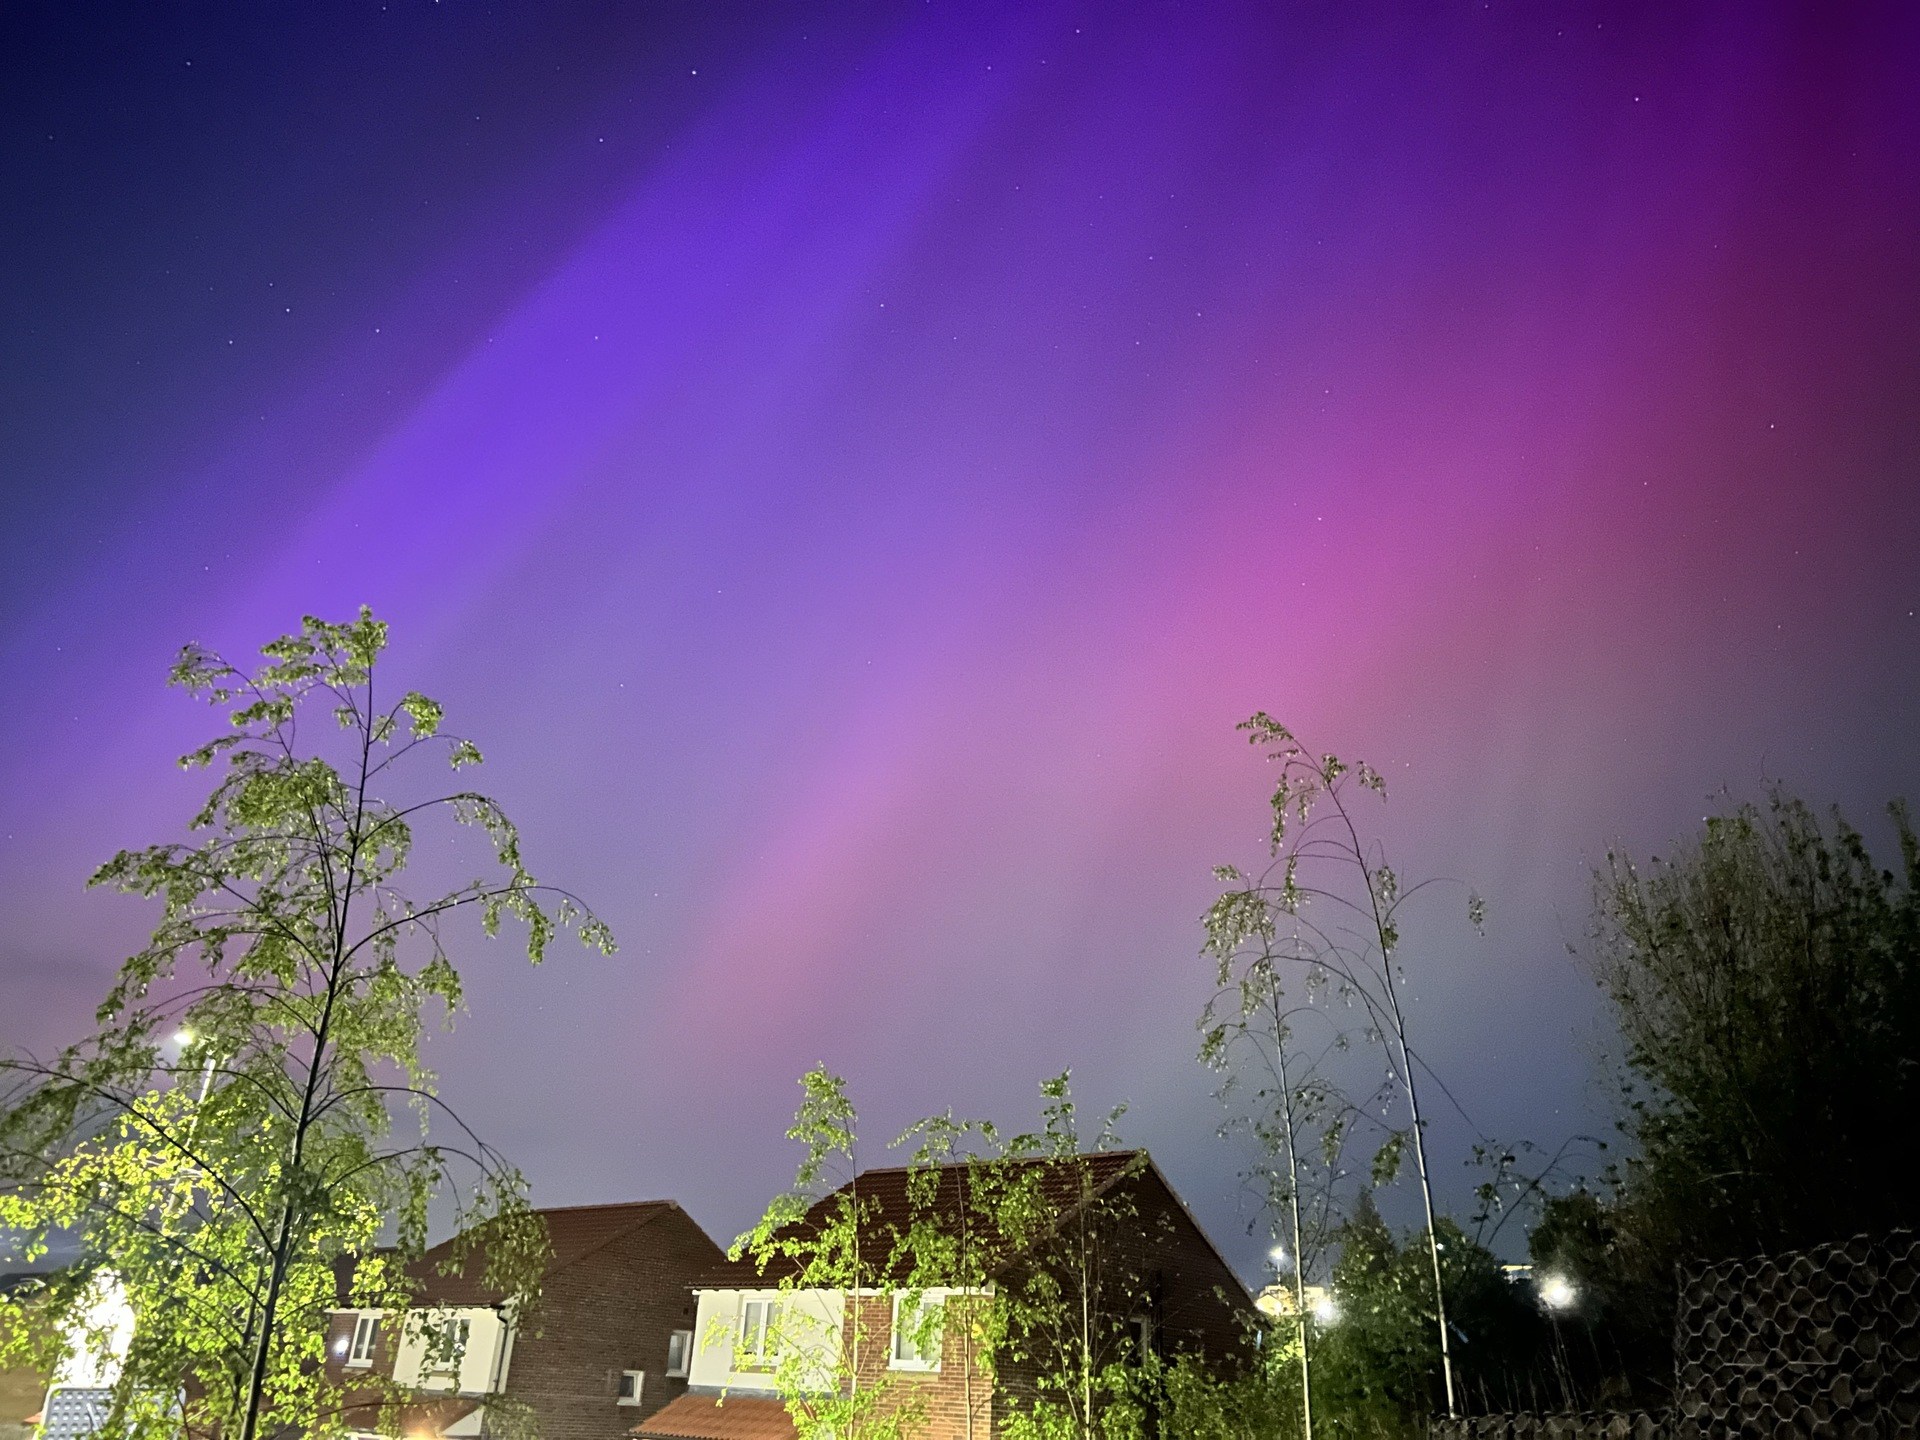 Those seeking to see the aurora borealis should head to an area with no light pollution.